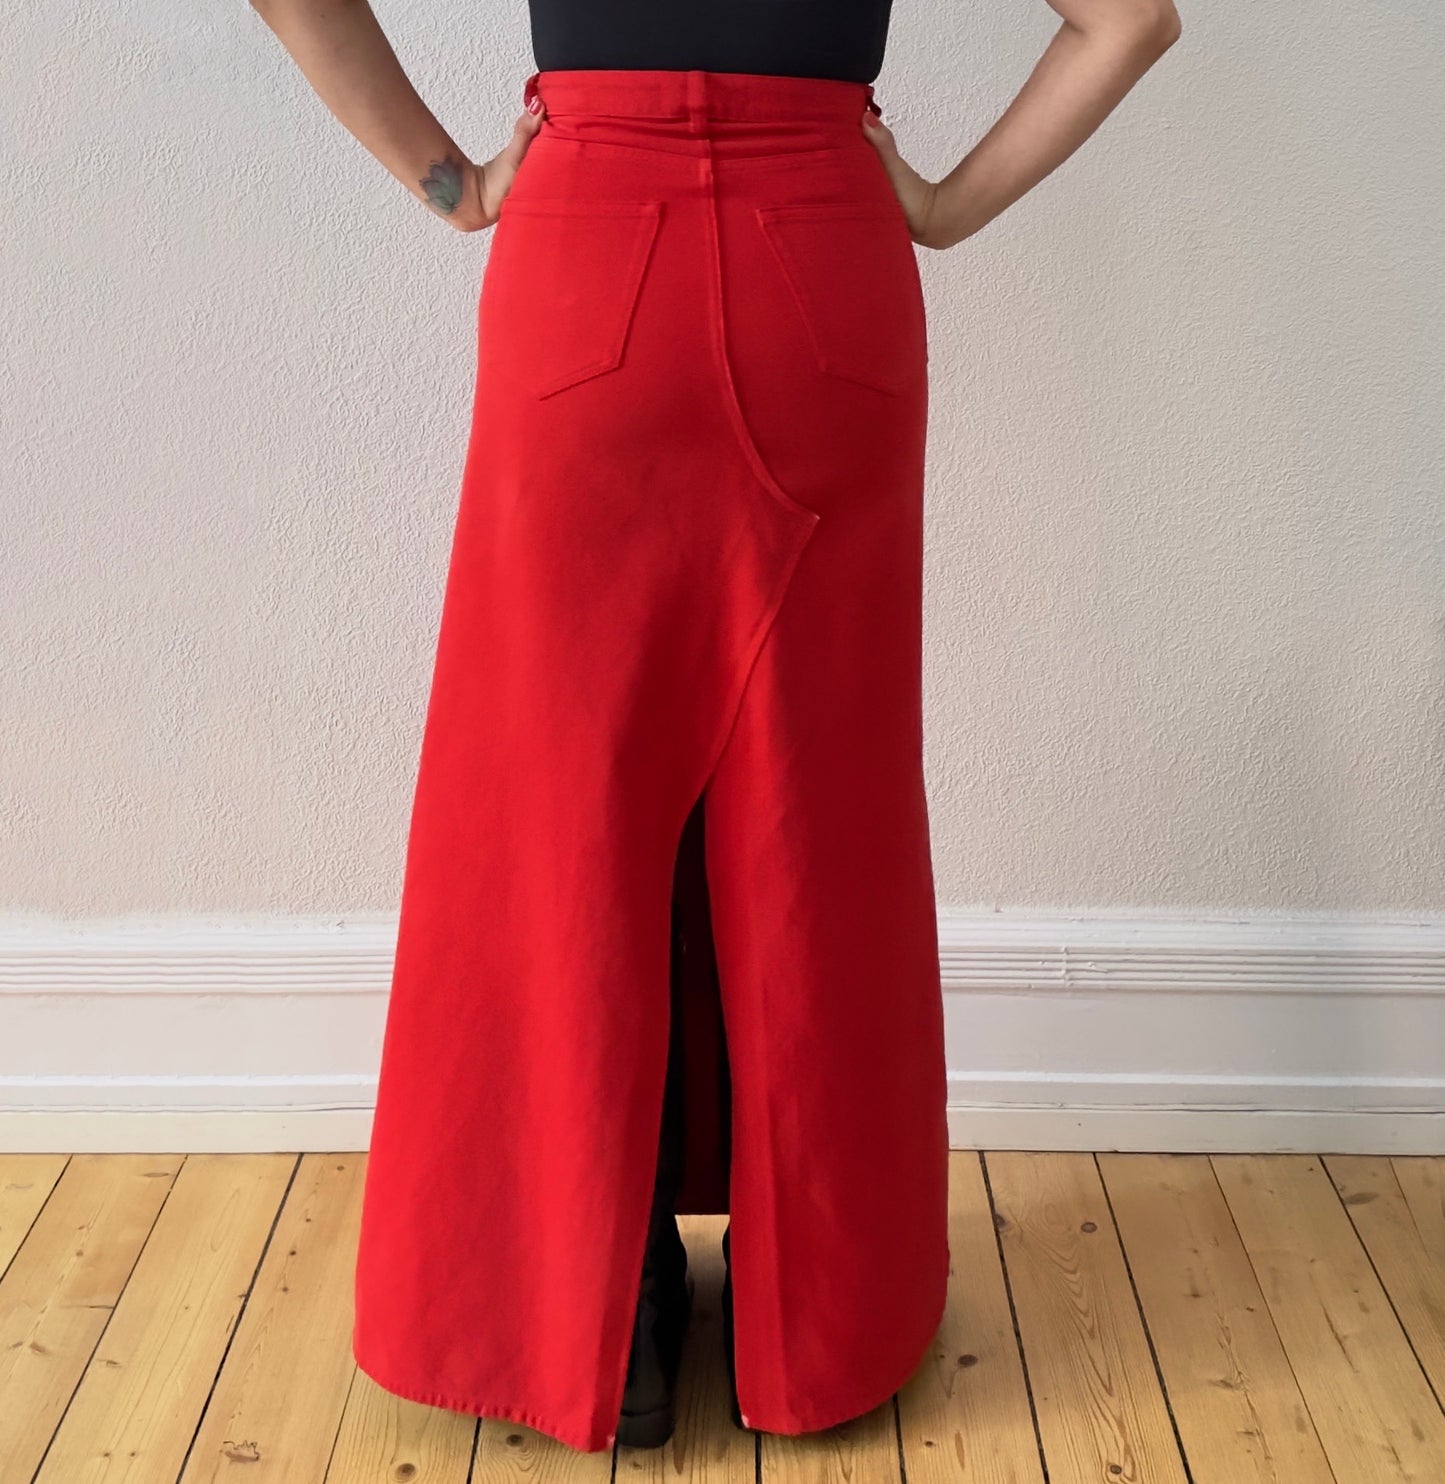 Upcycled Denim Maxi Skirt 22 - Red - Size M